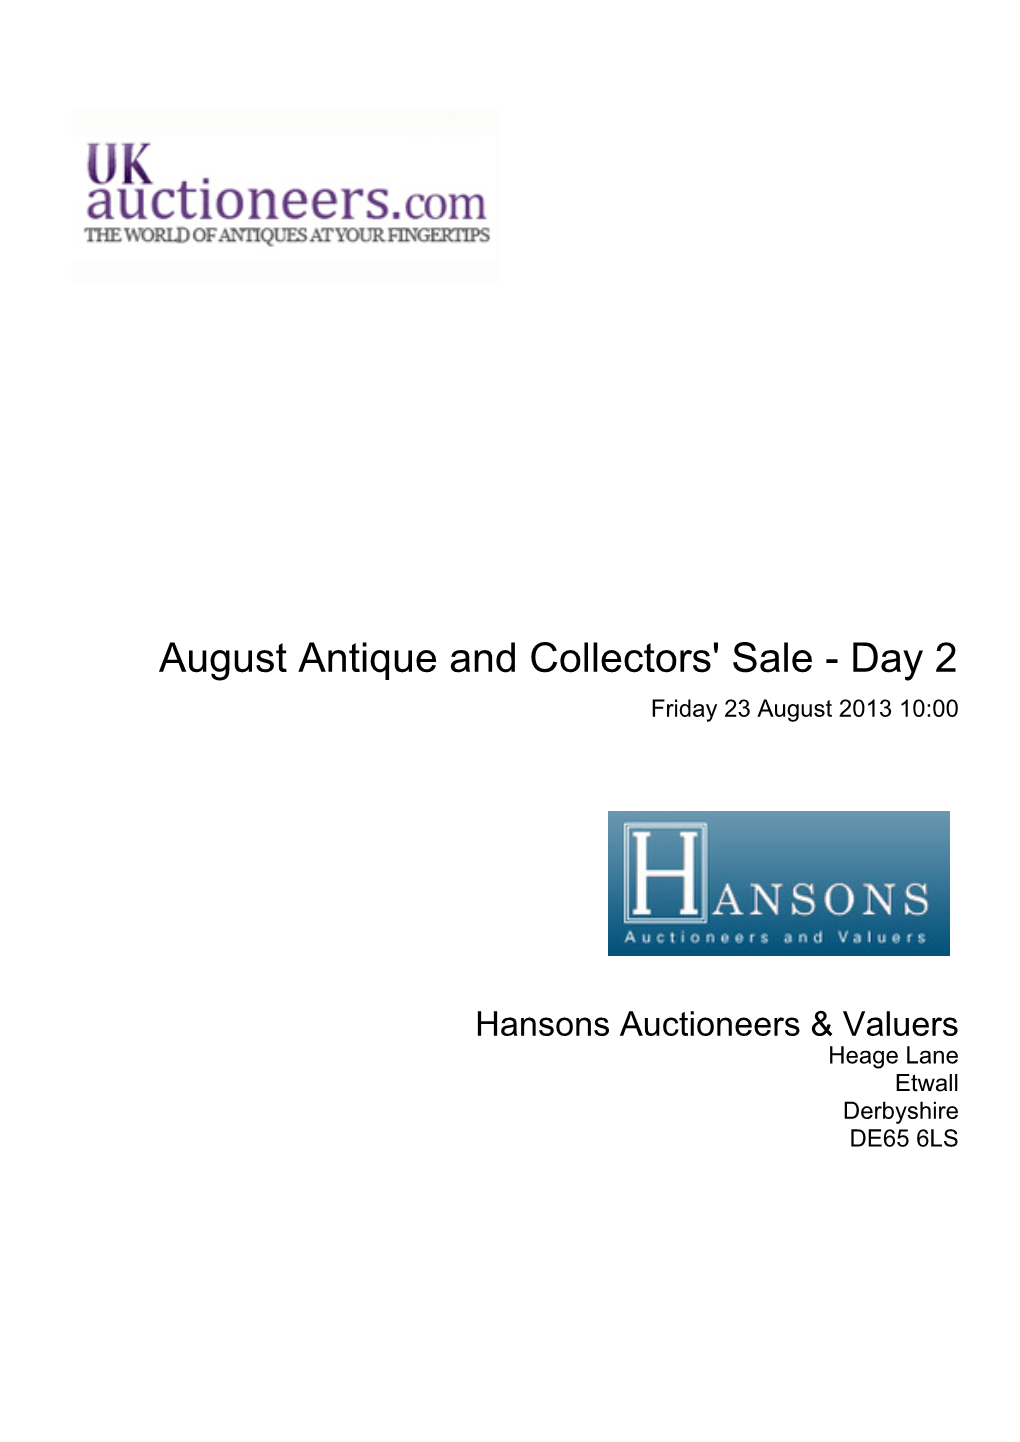 August Antique and Collectors' Sale - Day 2 Friday 23 August 2013 10:00